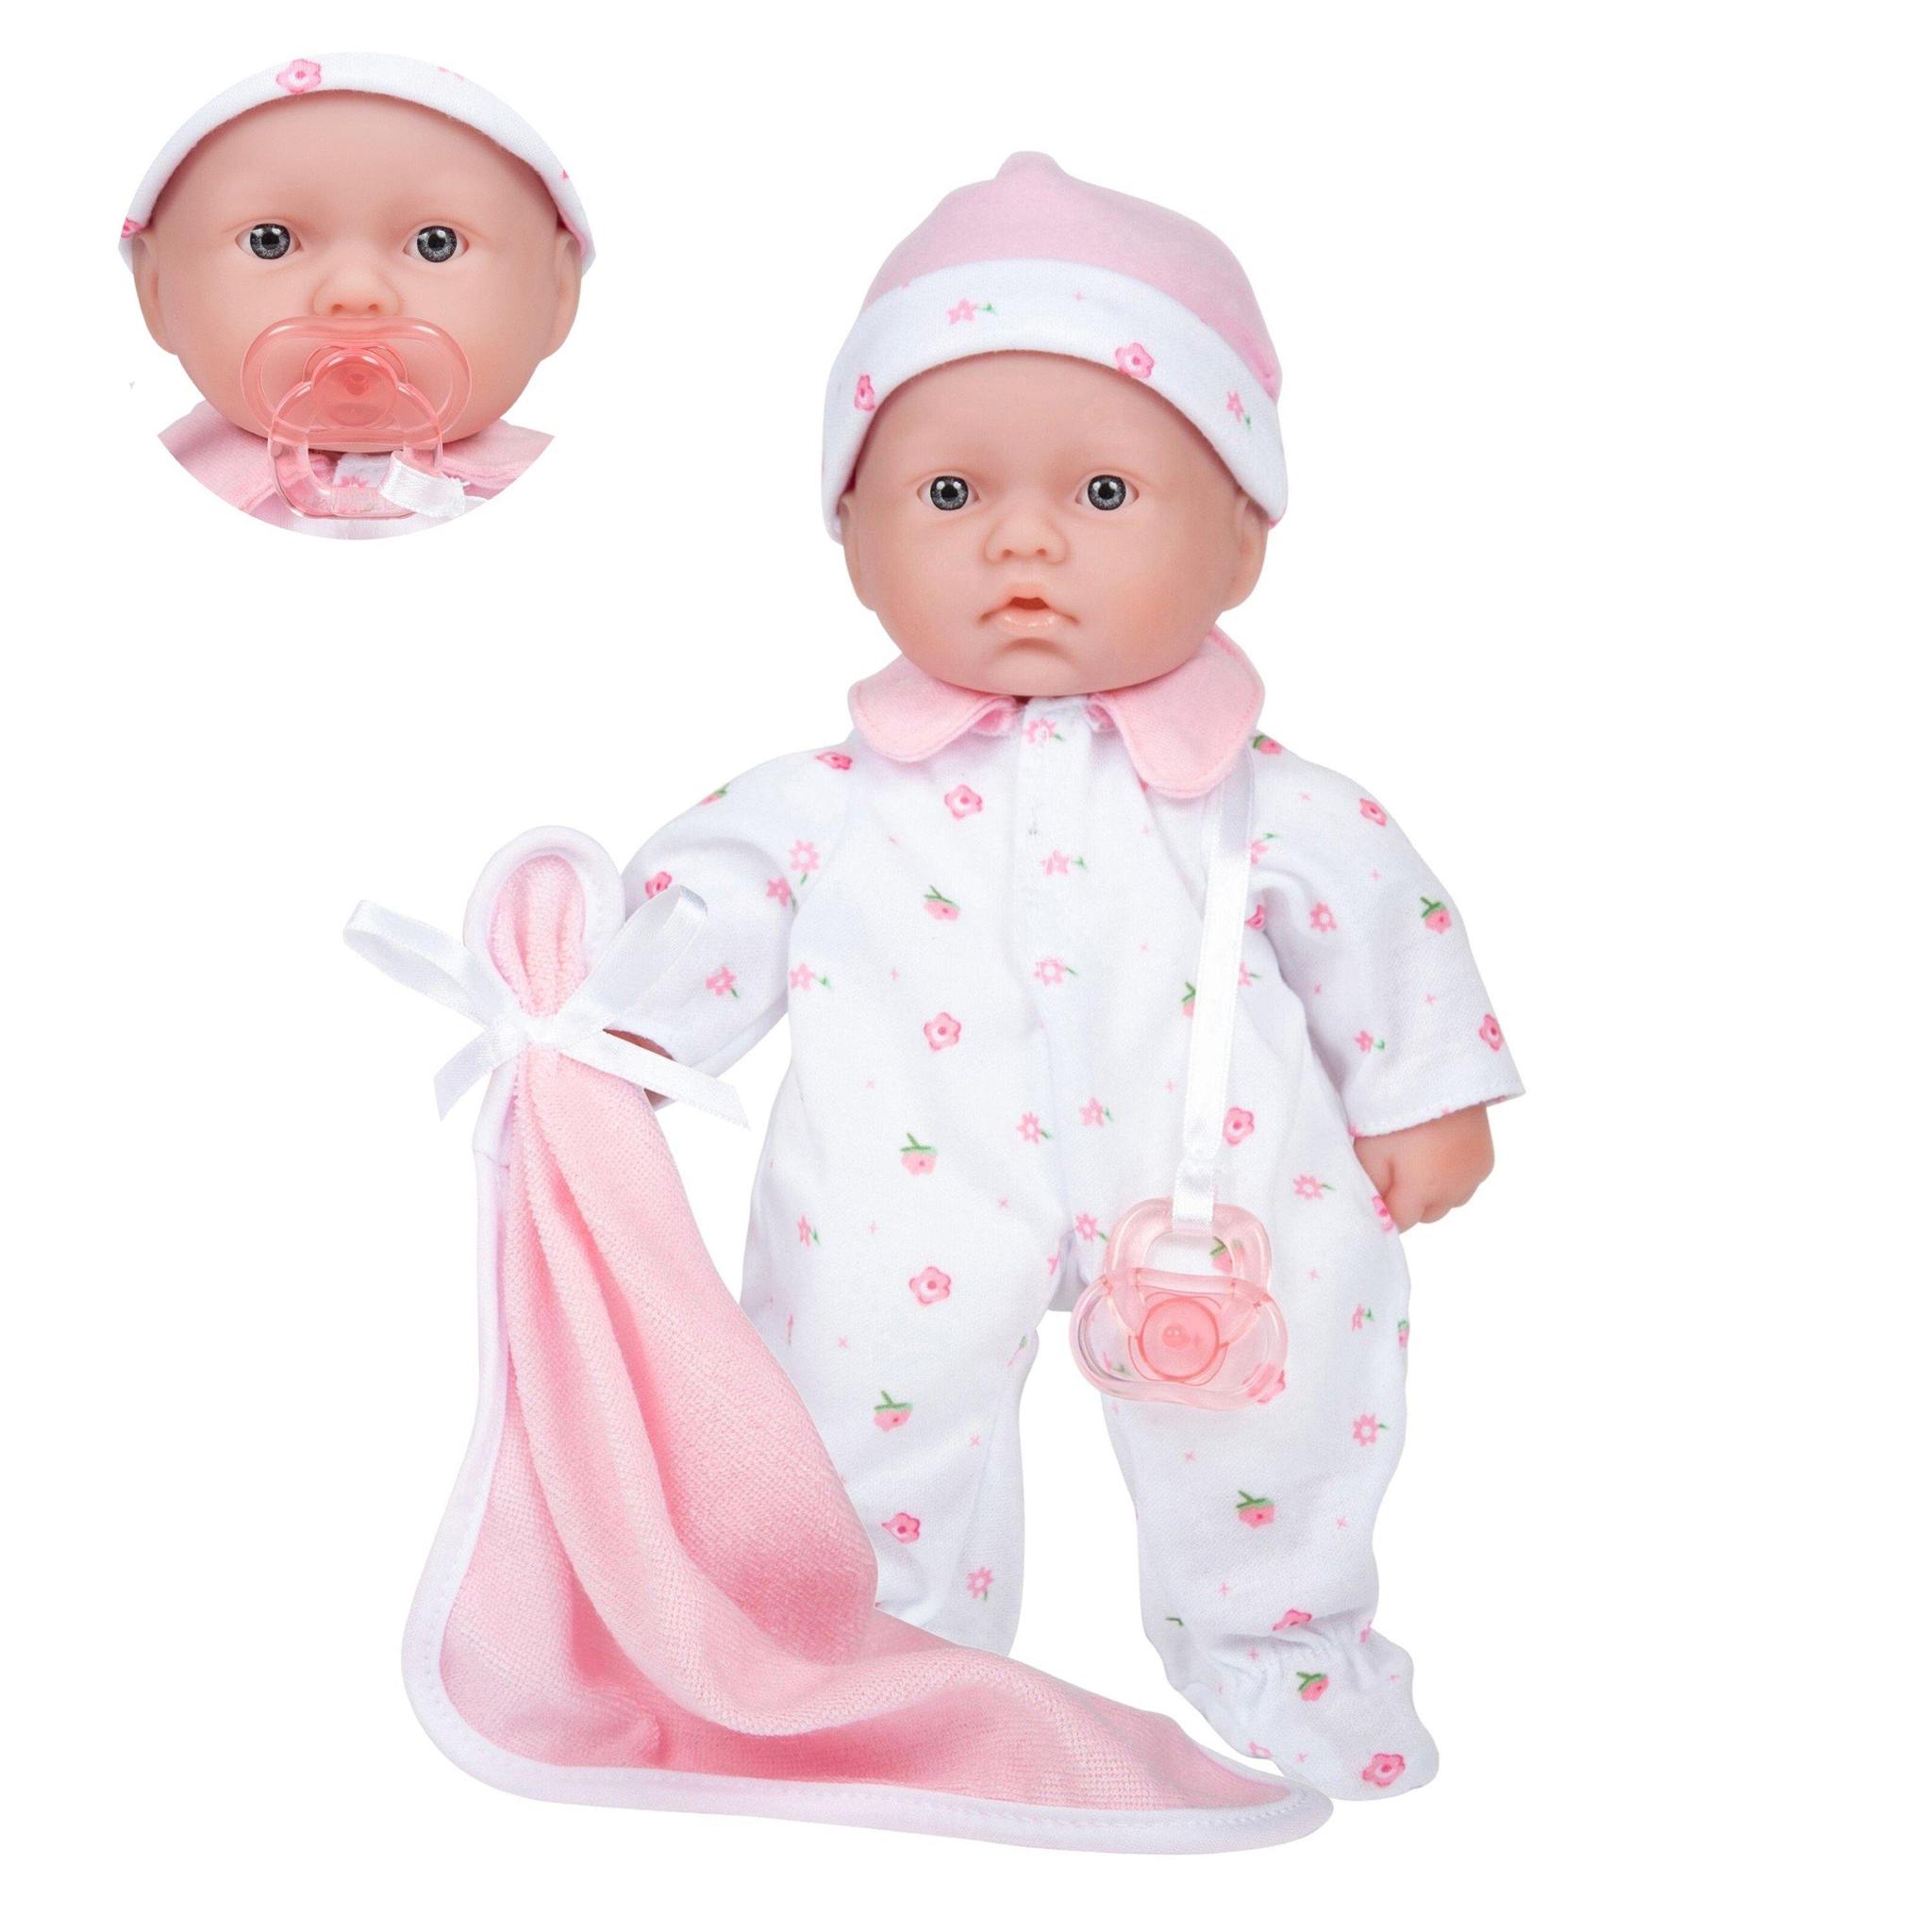 Picture of La Baby 11 in. Soft Body Baby Doll in Pink with Realistic Features